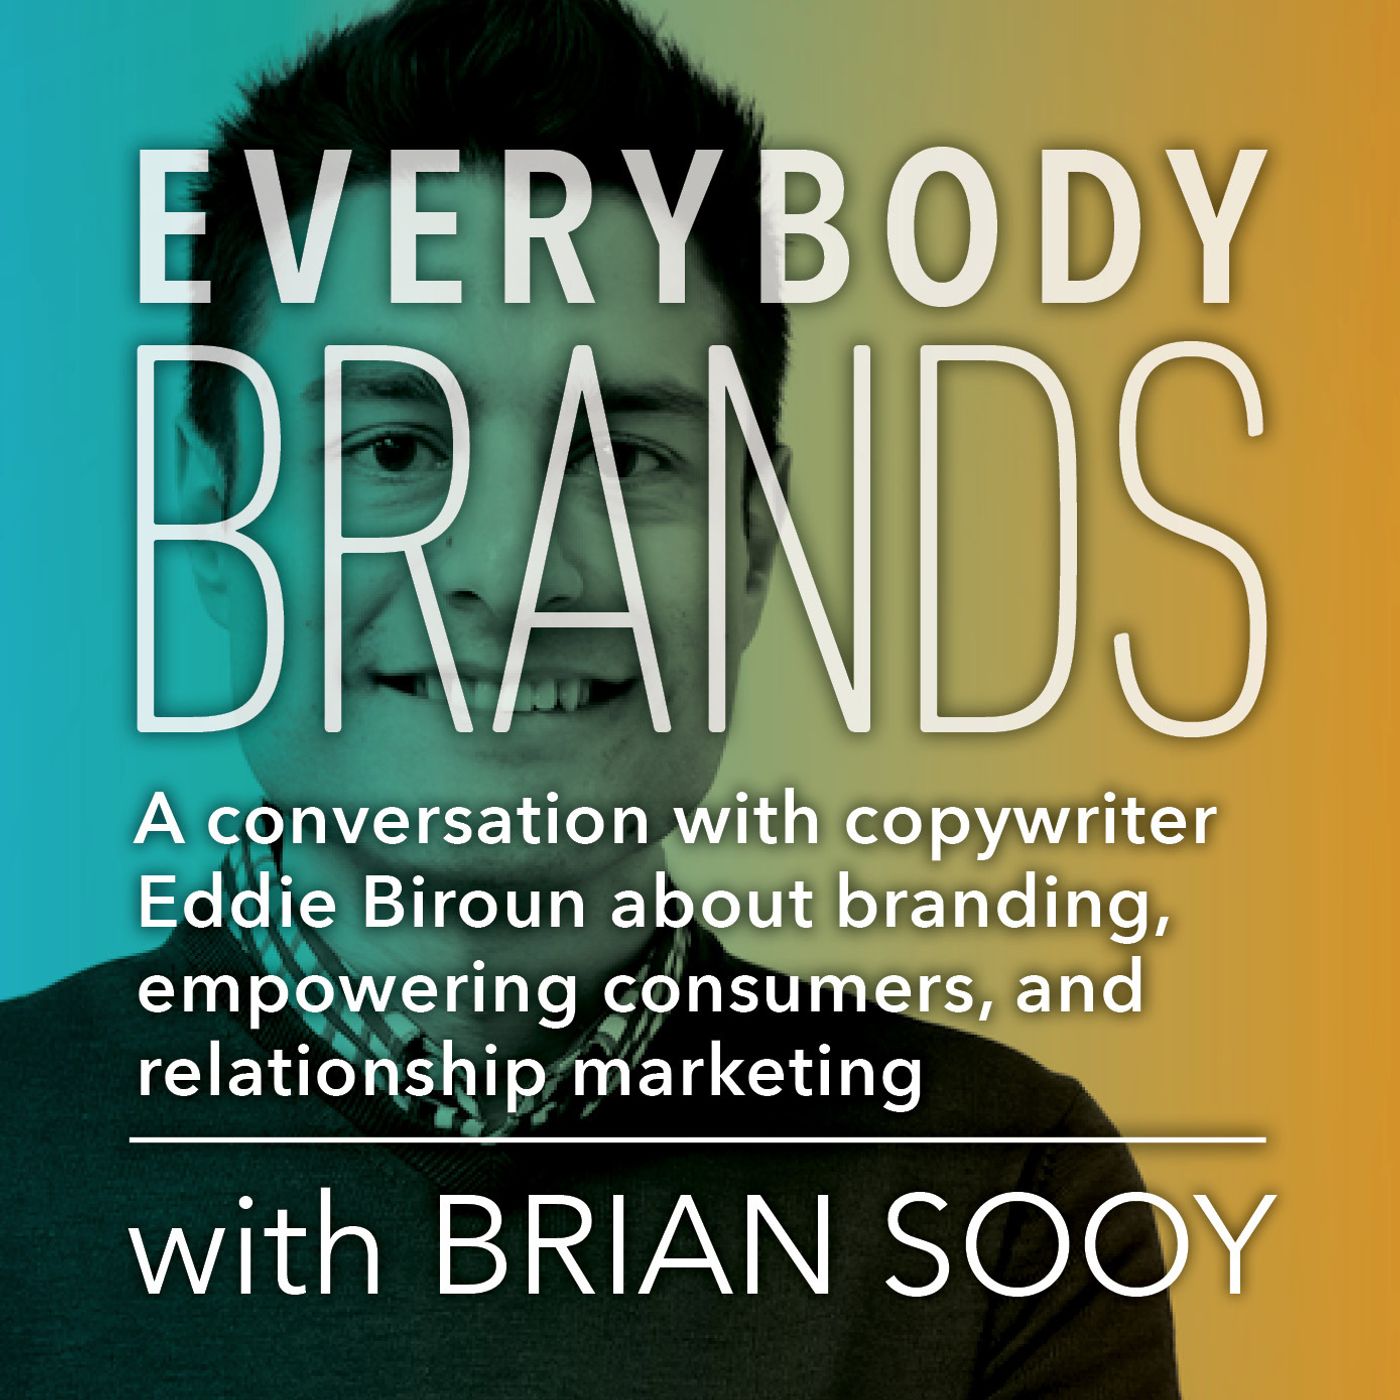 How Brands Empower Consumers and Build Relationships